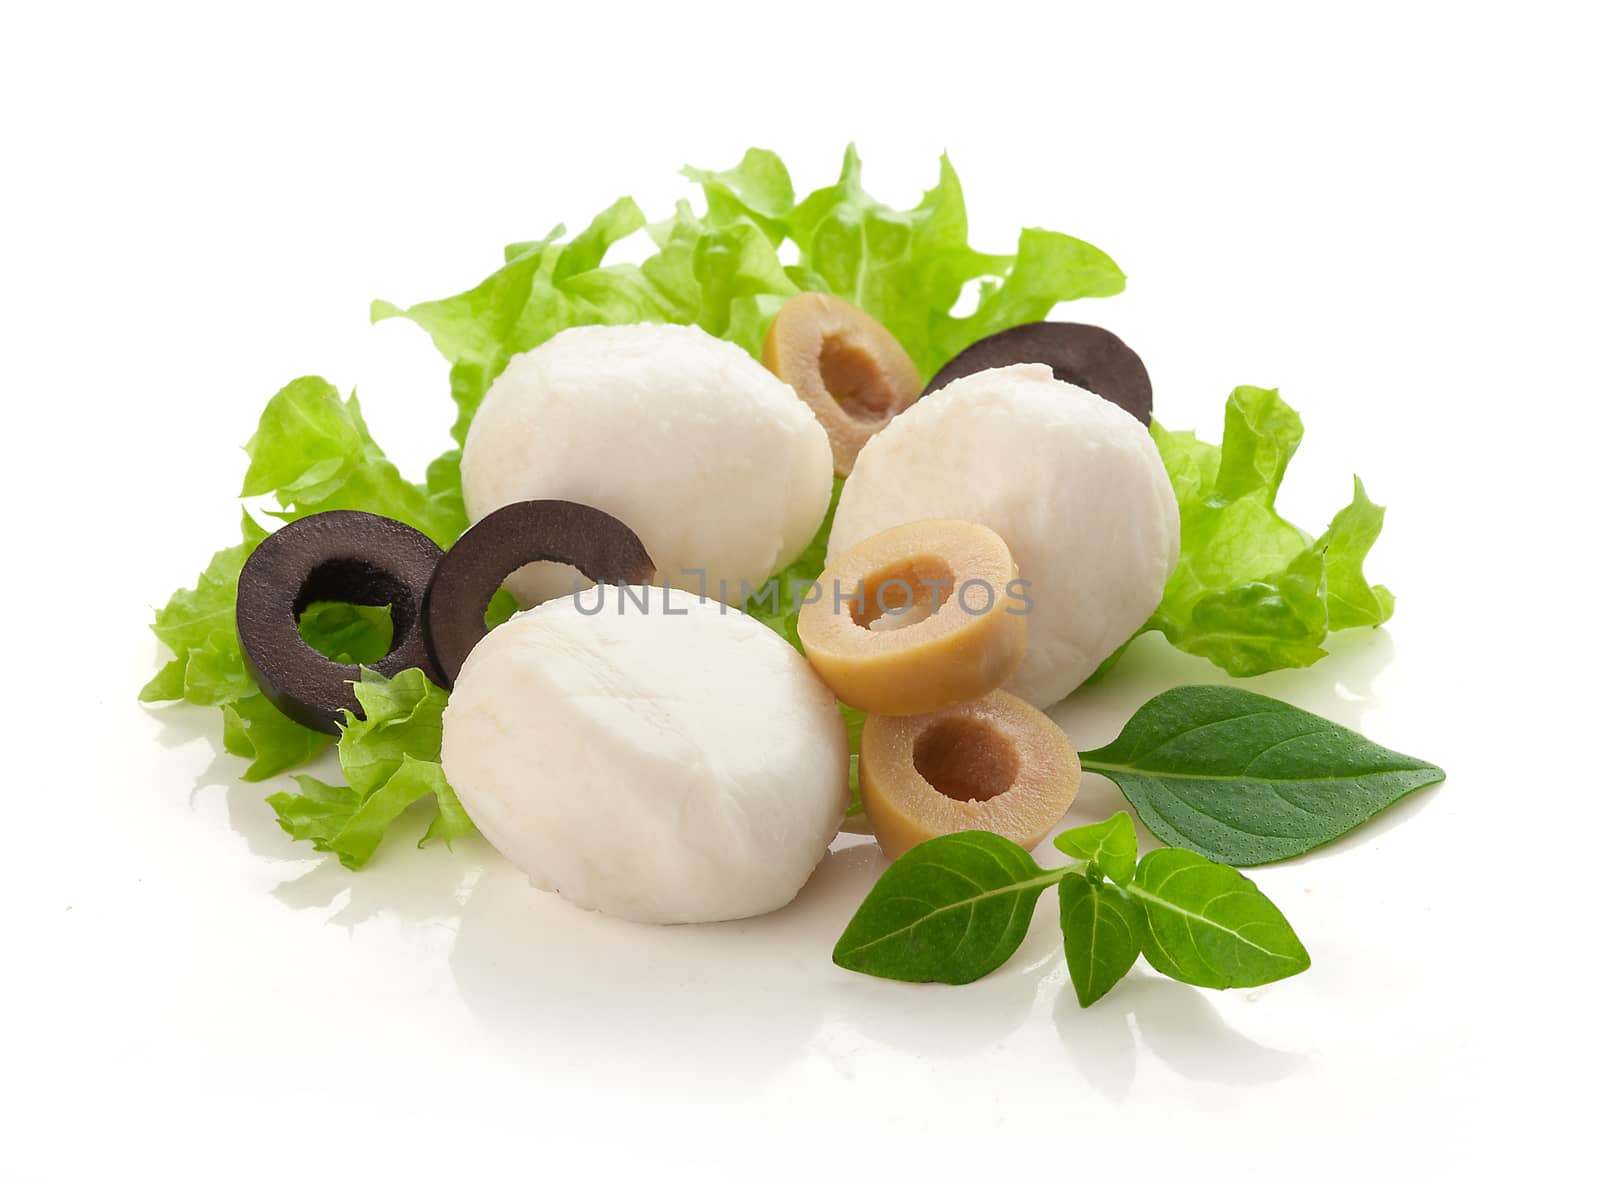 Mozzarella with olives and green lettuce by Angorius